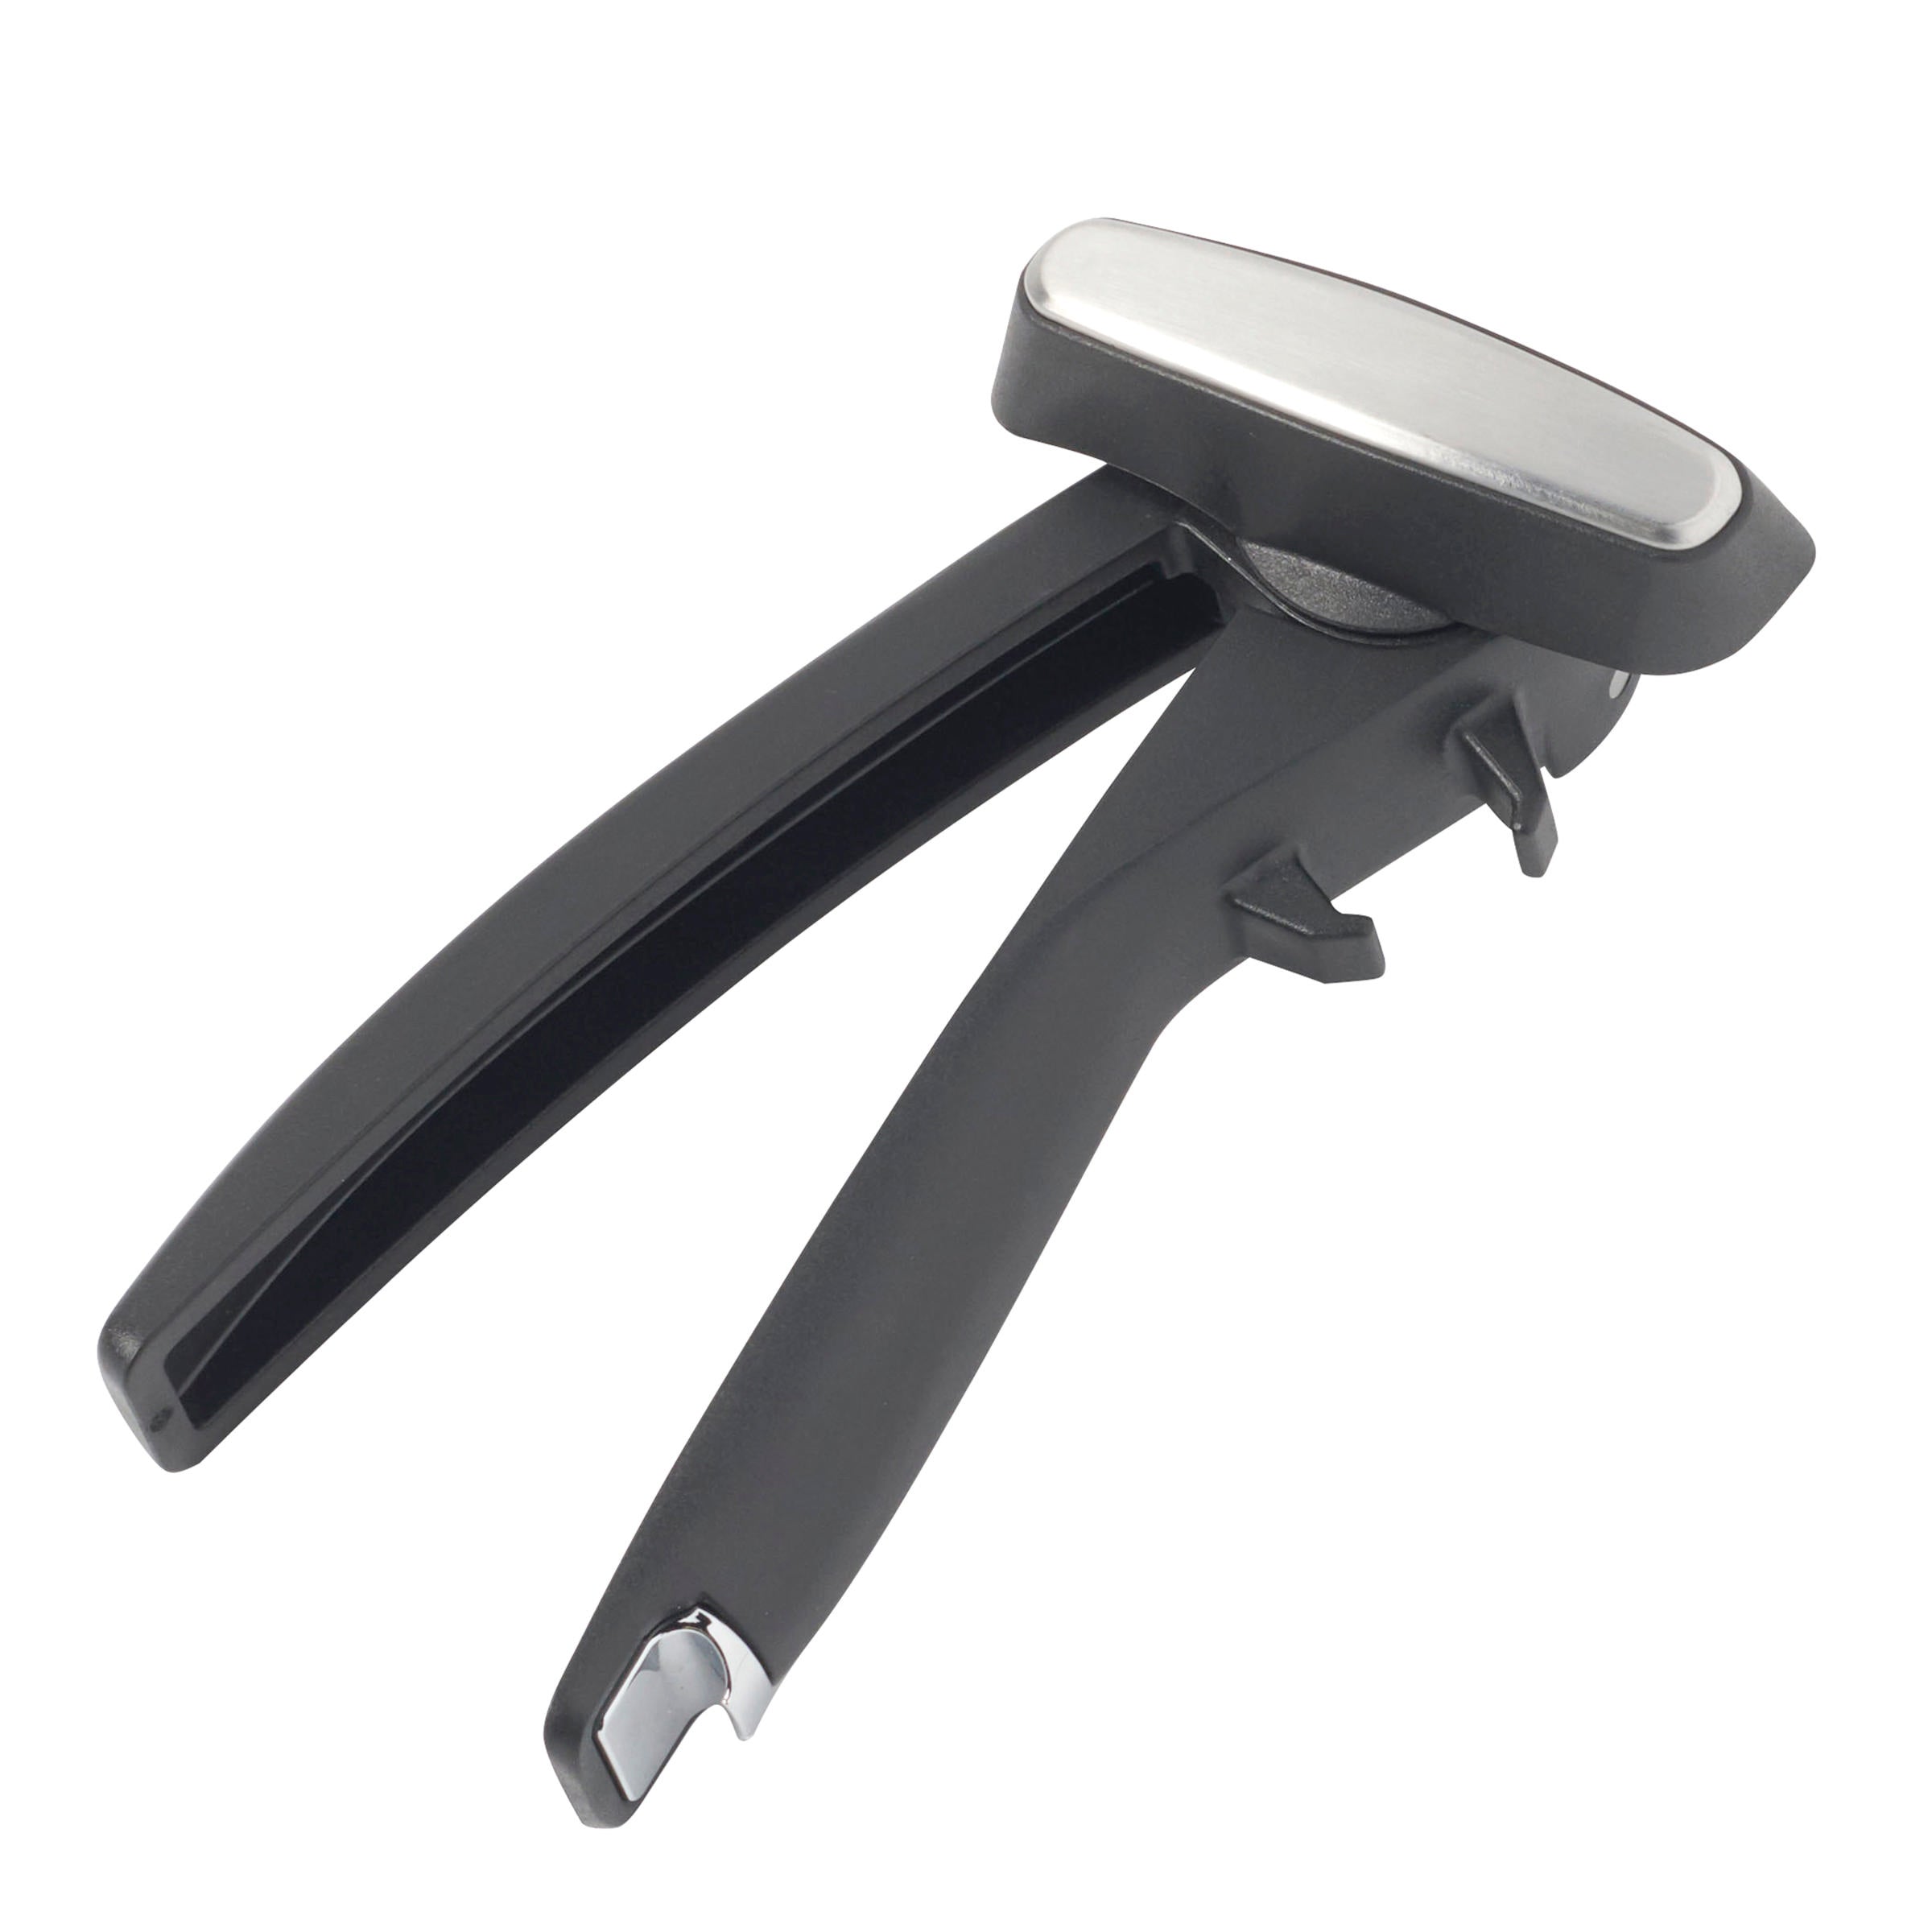 Everyday Living 3-in-1 Can Opener - Silver, 1 ct - Kroger